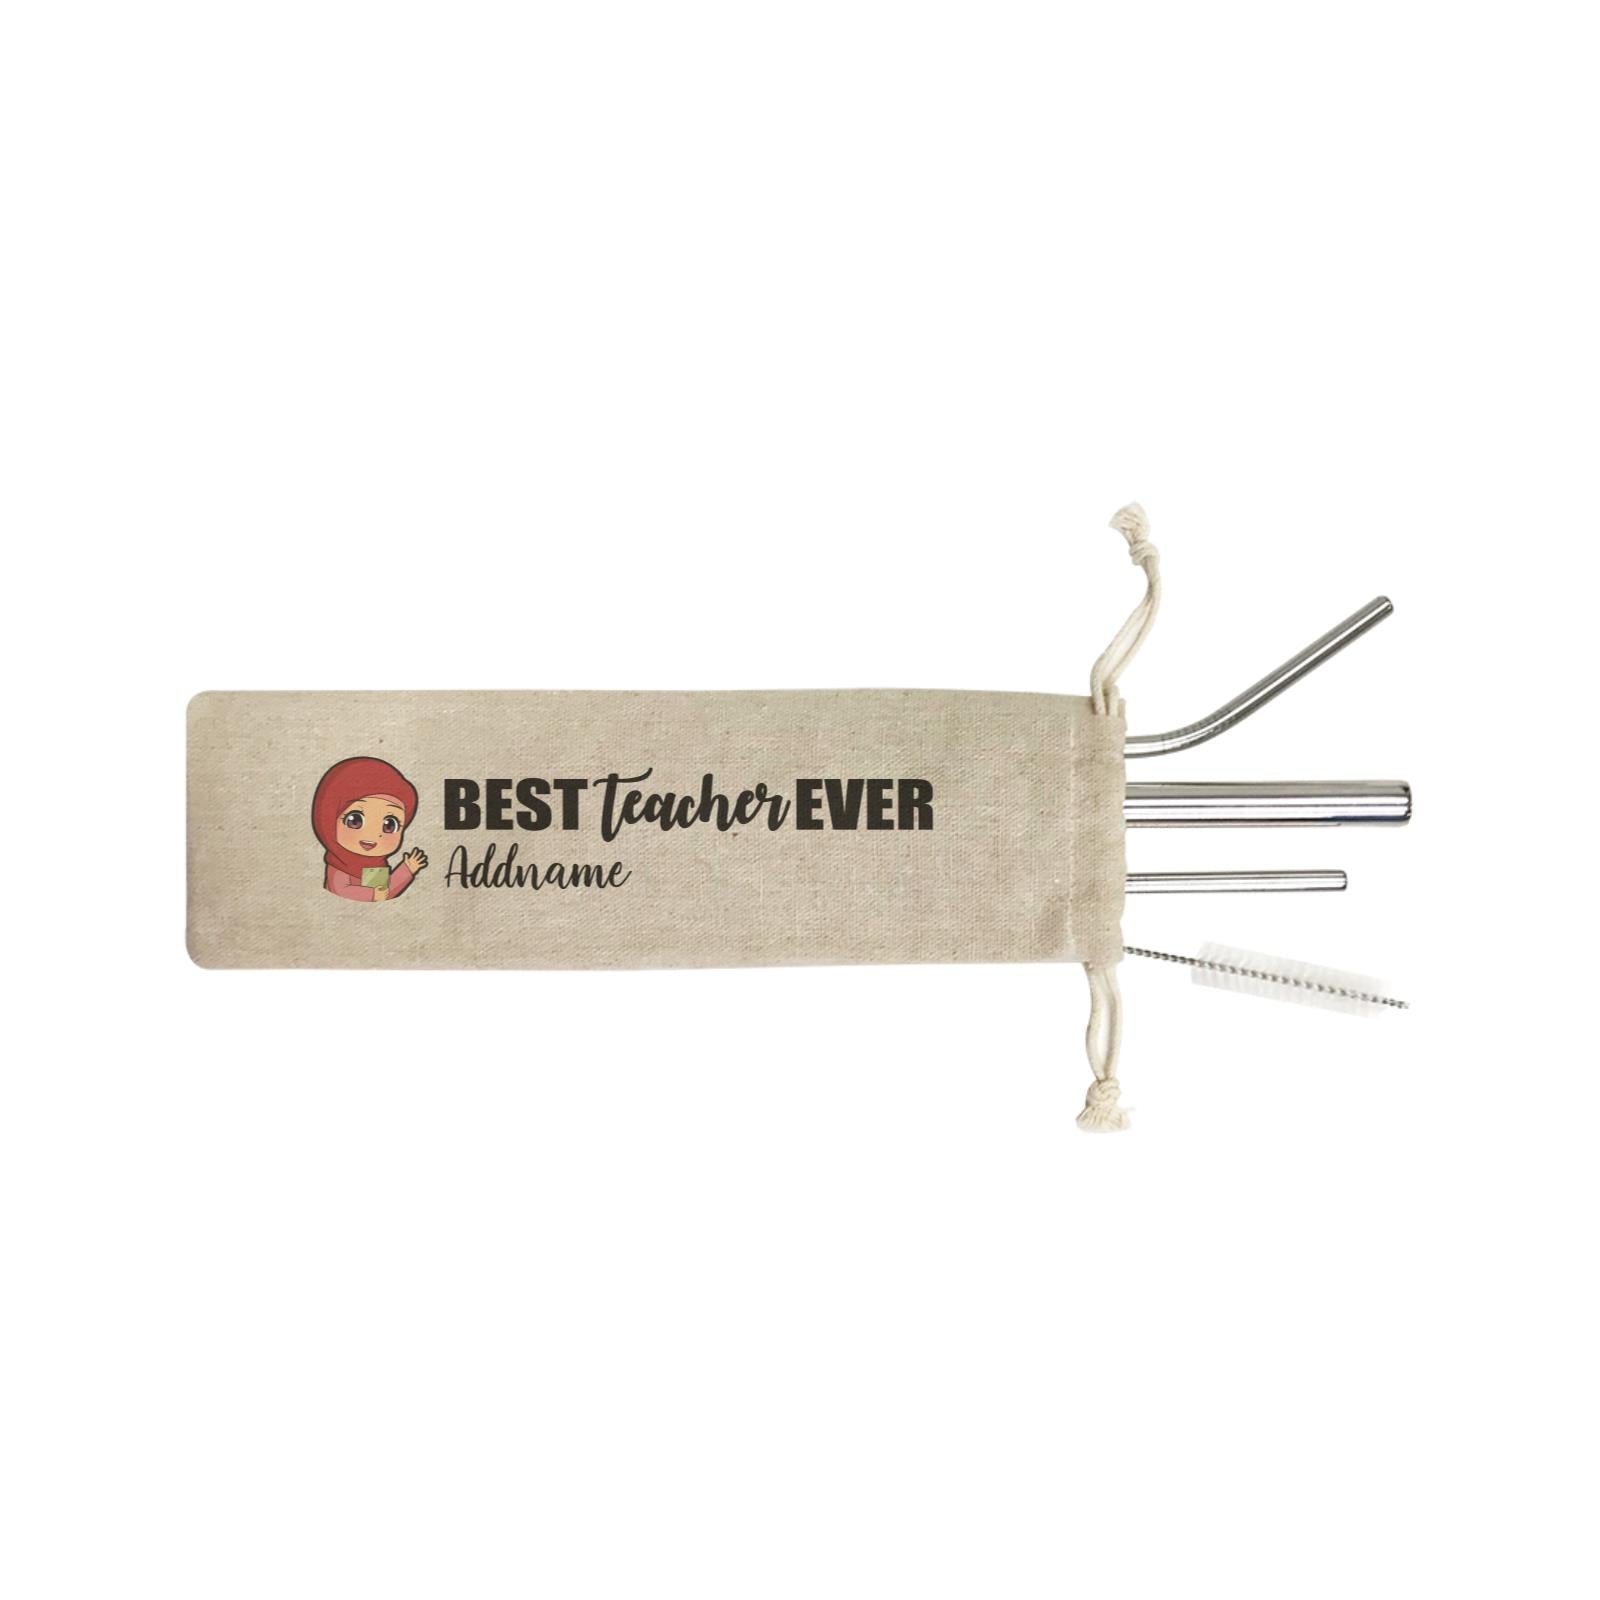 Chibi Teachers Malay Woman Best Teacher Ever Addname SB 4-In-1 Stainless Steel Straw Set in Satchel